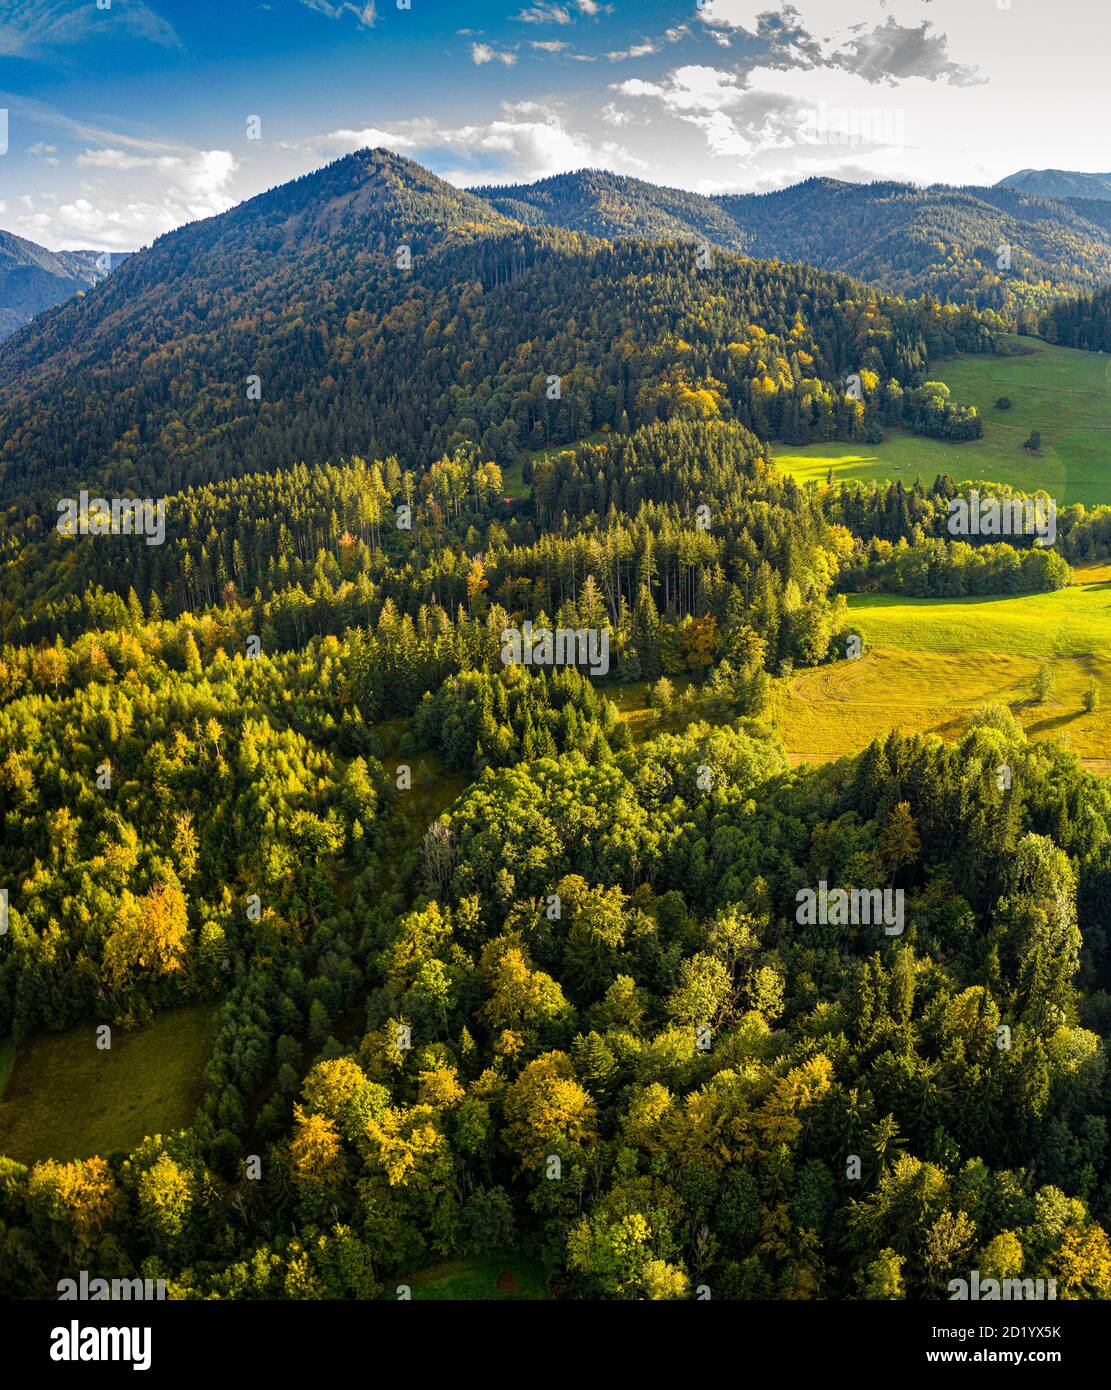 Tegernsee lake in the Bavarian Alps. Aerial Panorama Mountain View. Autumn. Germany. Tegernsee Stock Photo